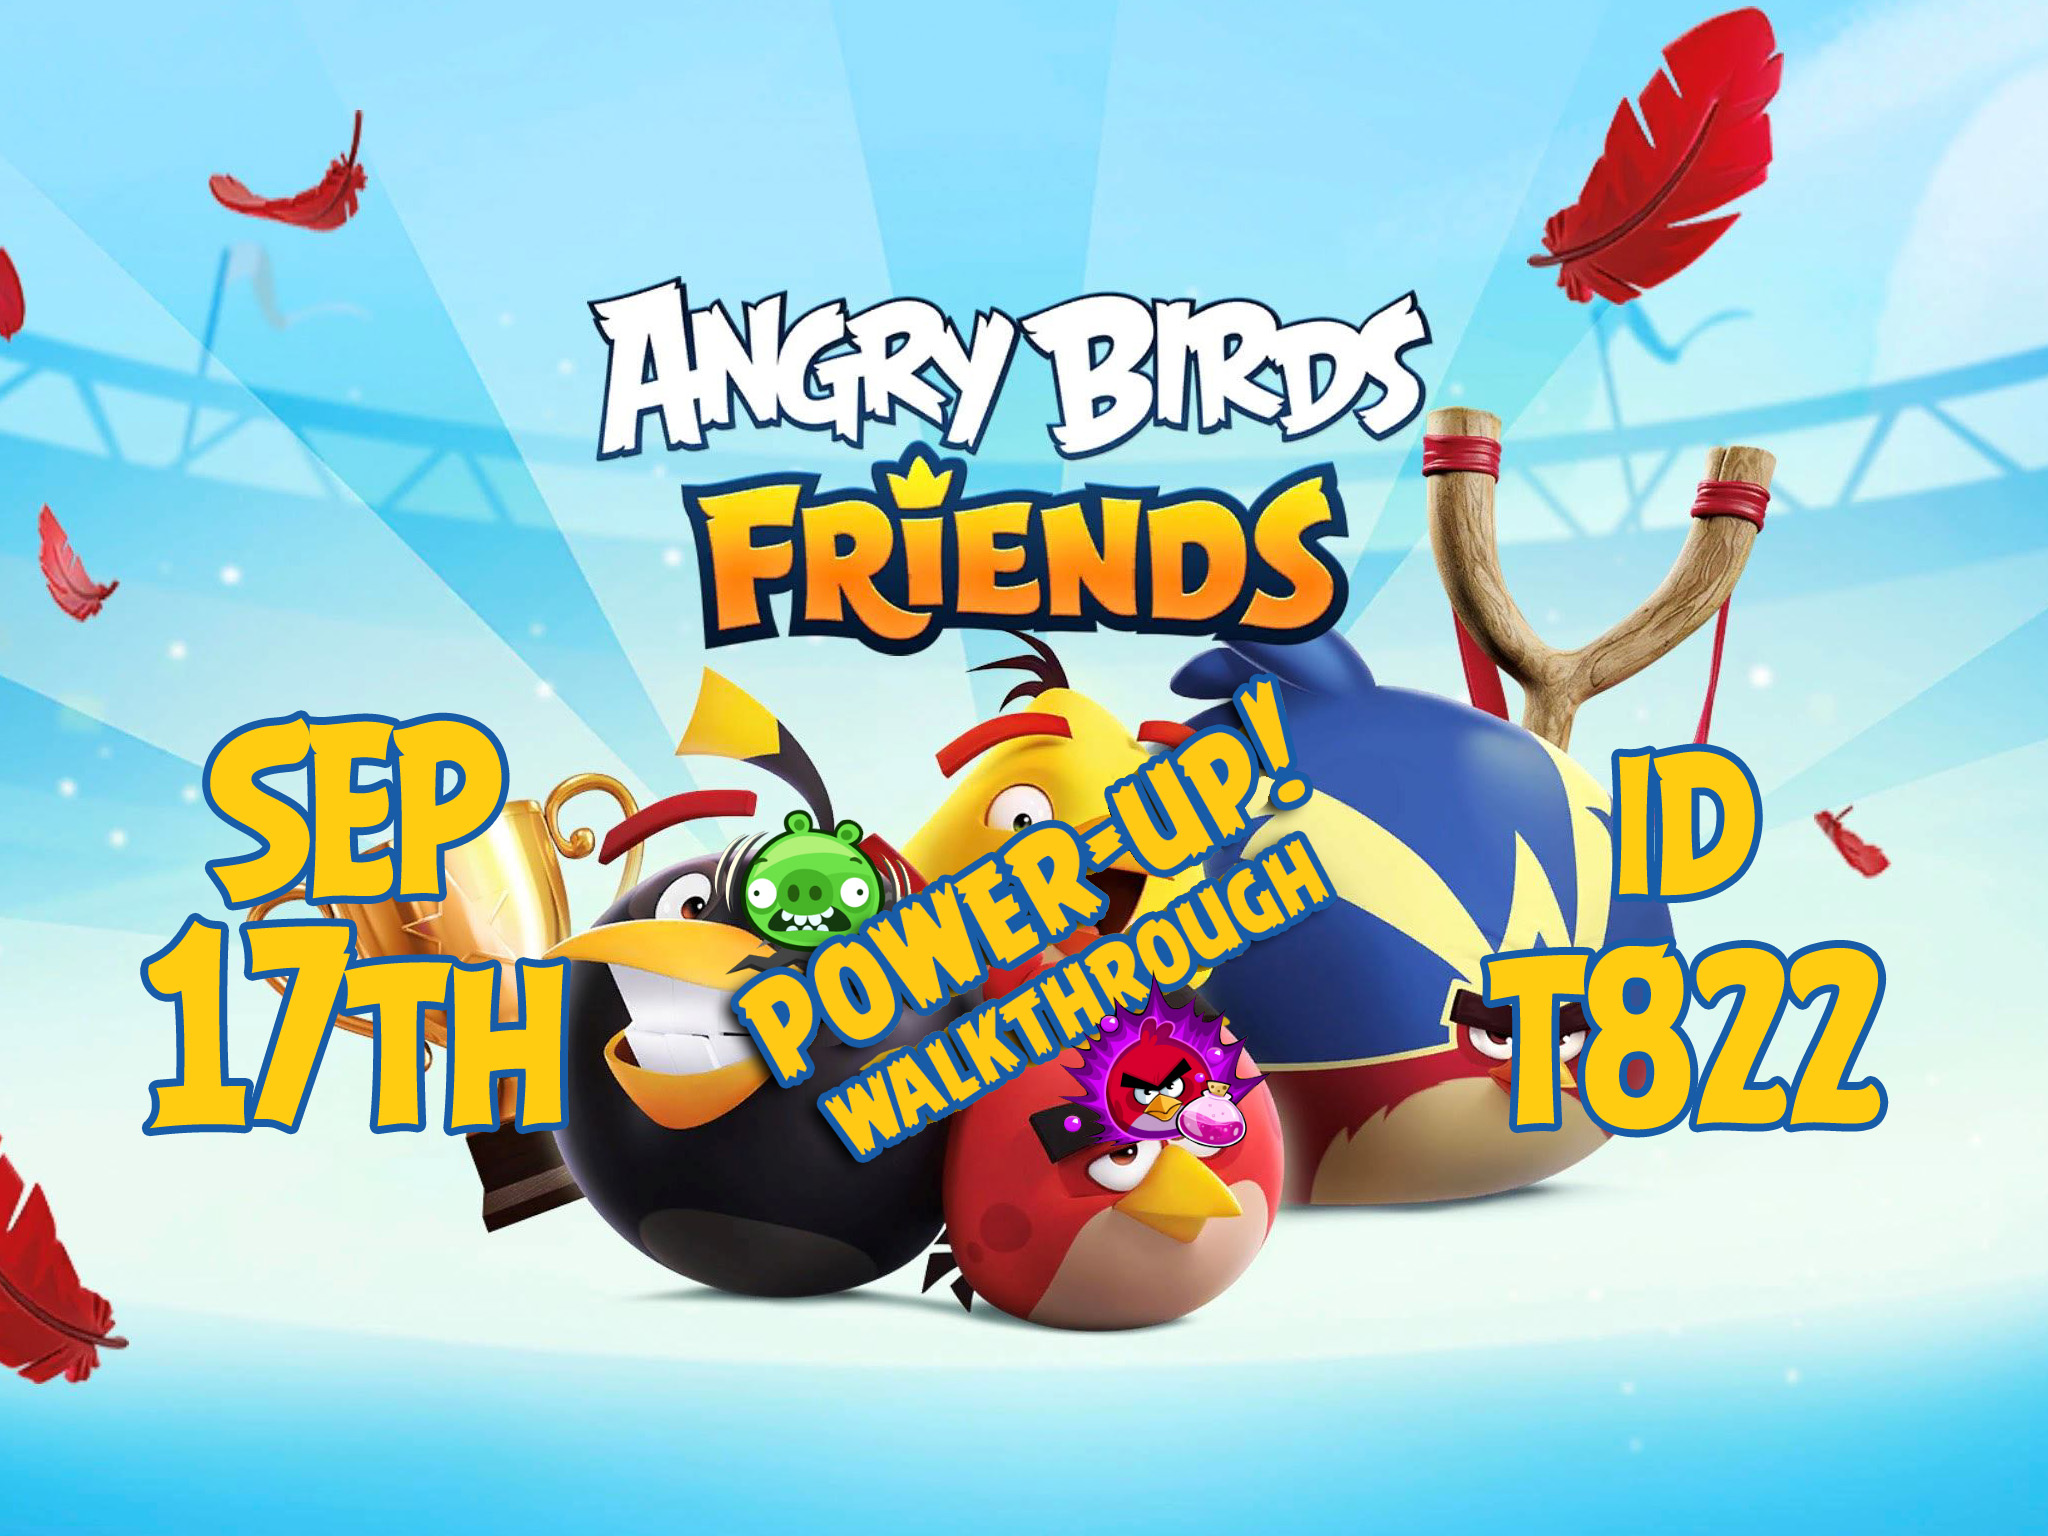 Angry-Birds-Friends-Tournament-T822-Feature-Image-PU